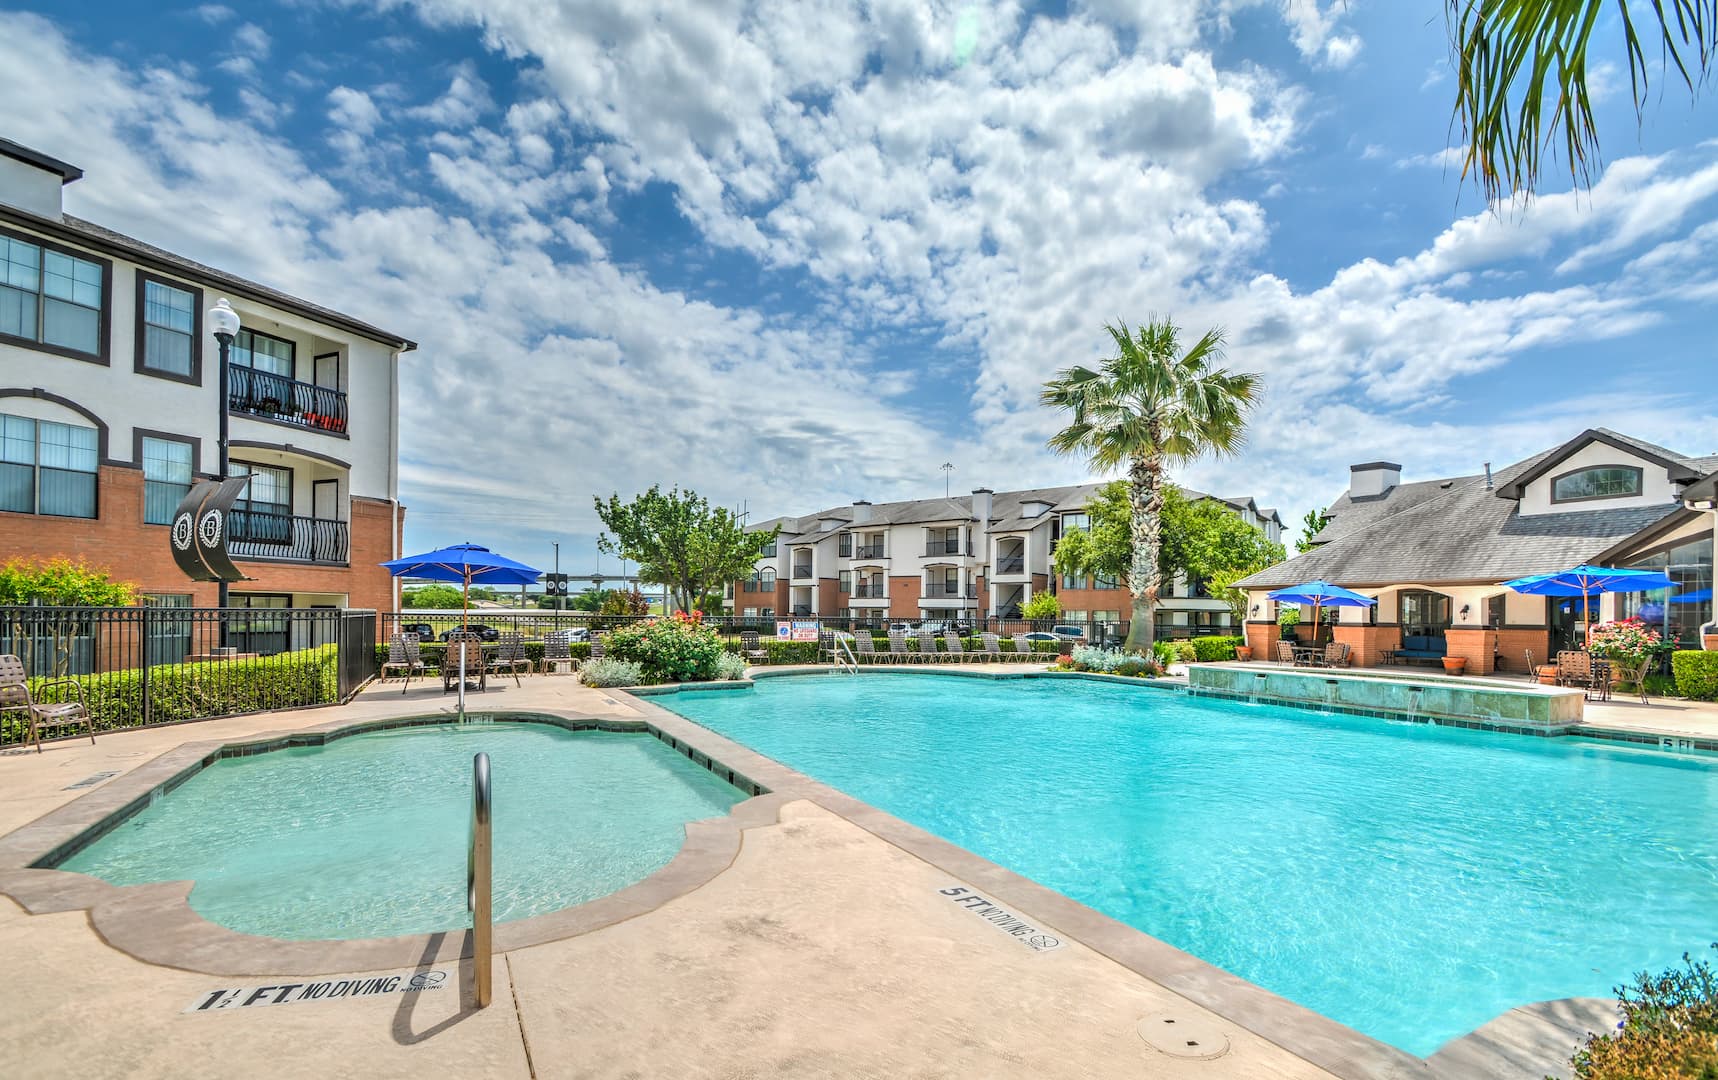 poolside view to apartment buildings